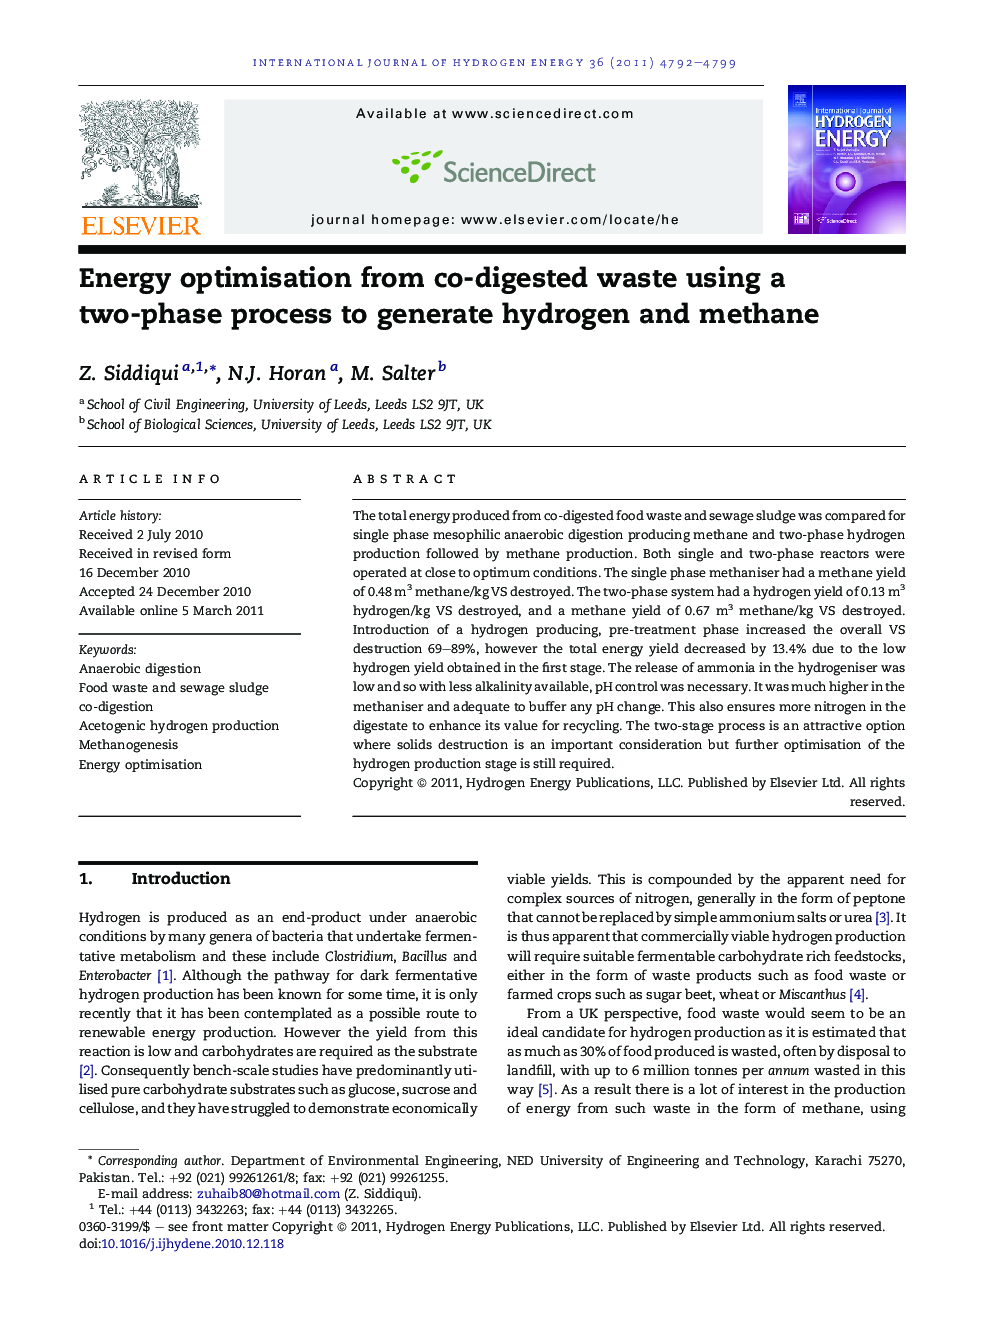 Energy optimisation from co-digested waste using a two-phase process to generate hydrogen and methane